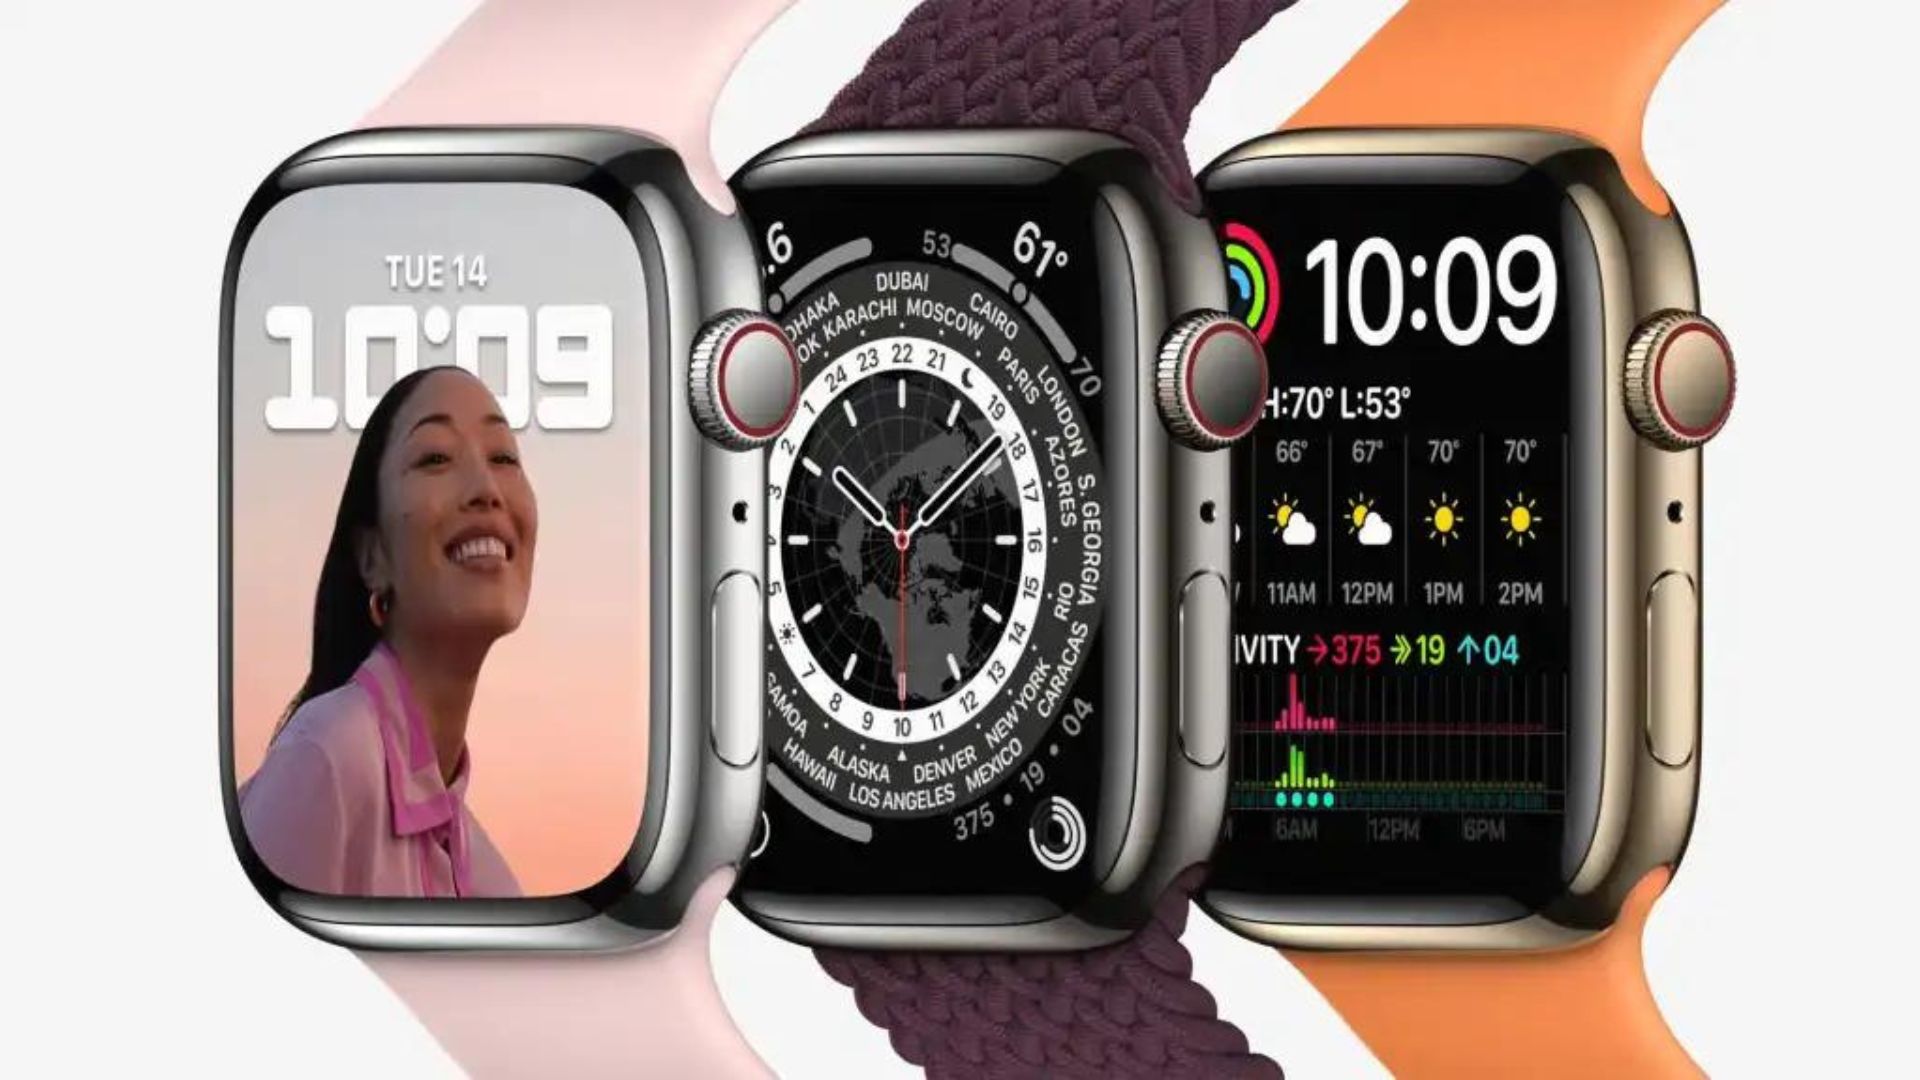 The Best Apple Watch Deals: This Is The Lowest We’ve Seen For The Apple Watch Series